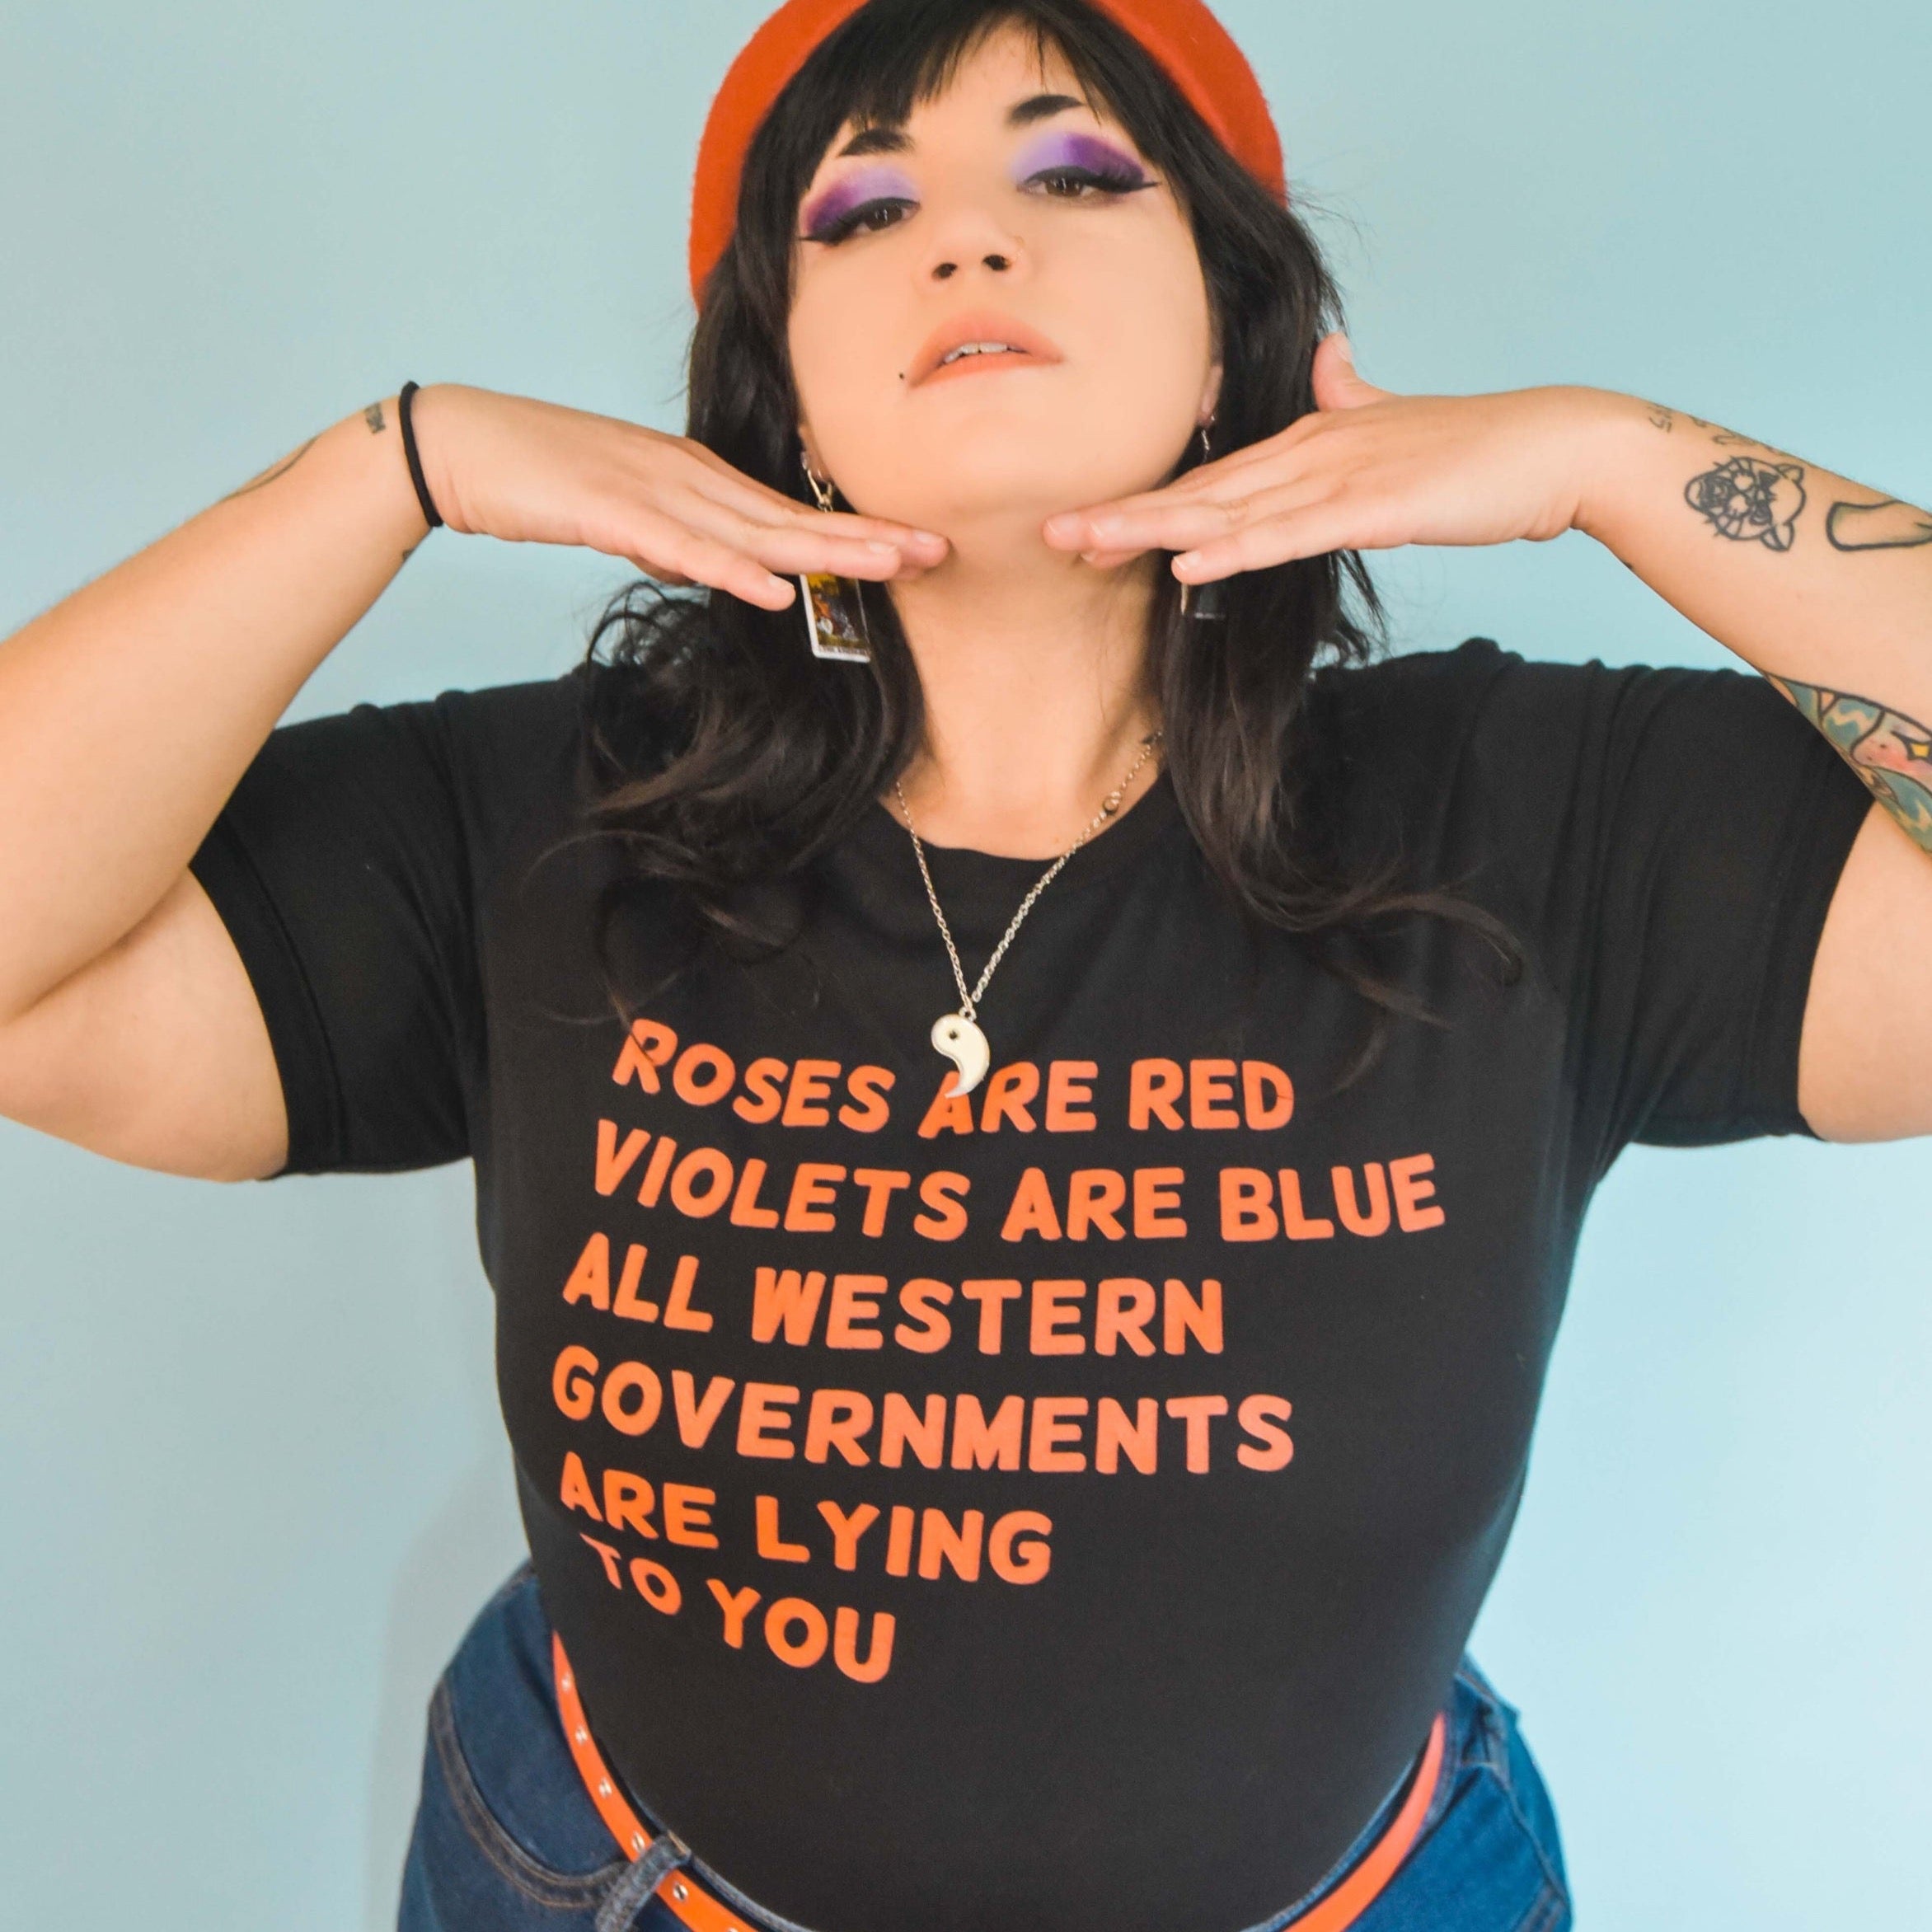  Bold Black Feminist T-shirt- "Roses Are Red, Violets Are Blue, All Western Governments Are Lying to You" - Shop Empowering Feminist Shirts